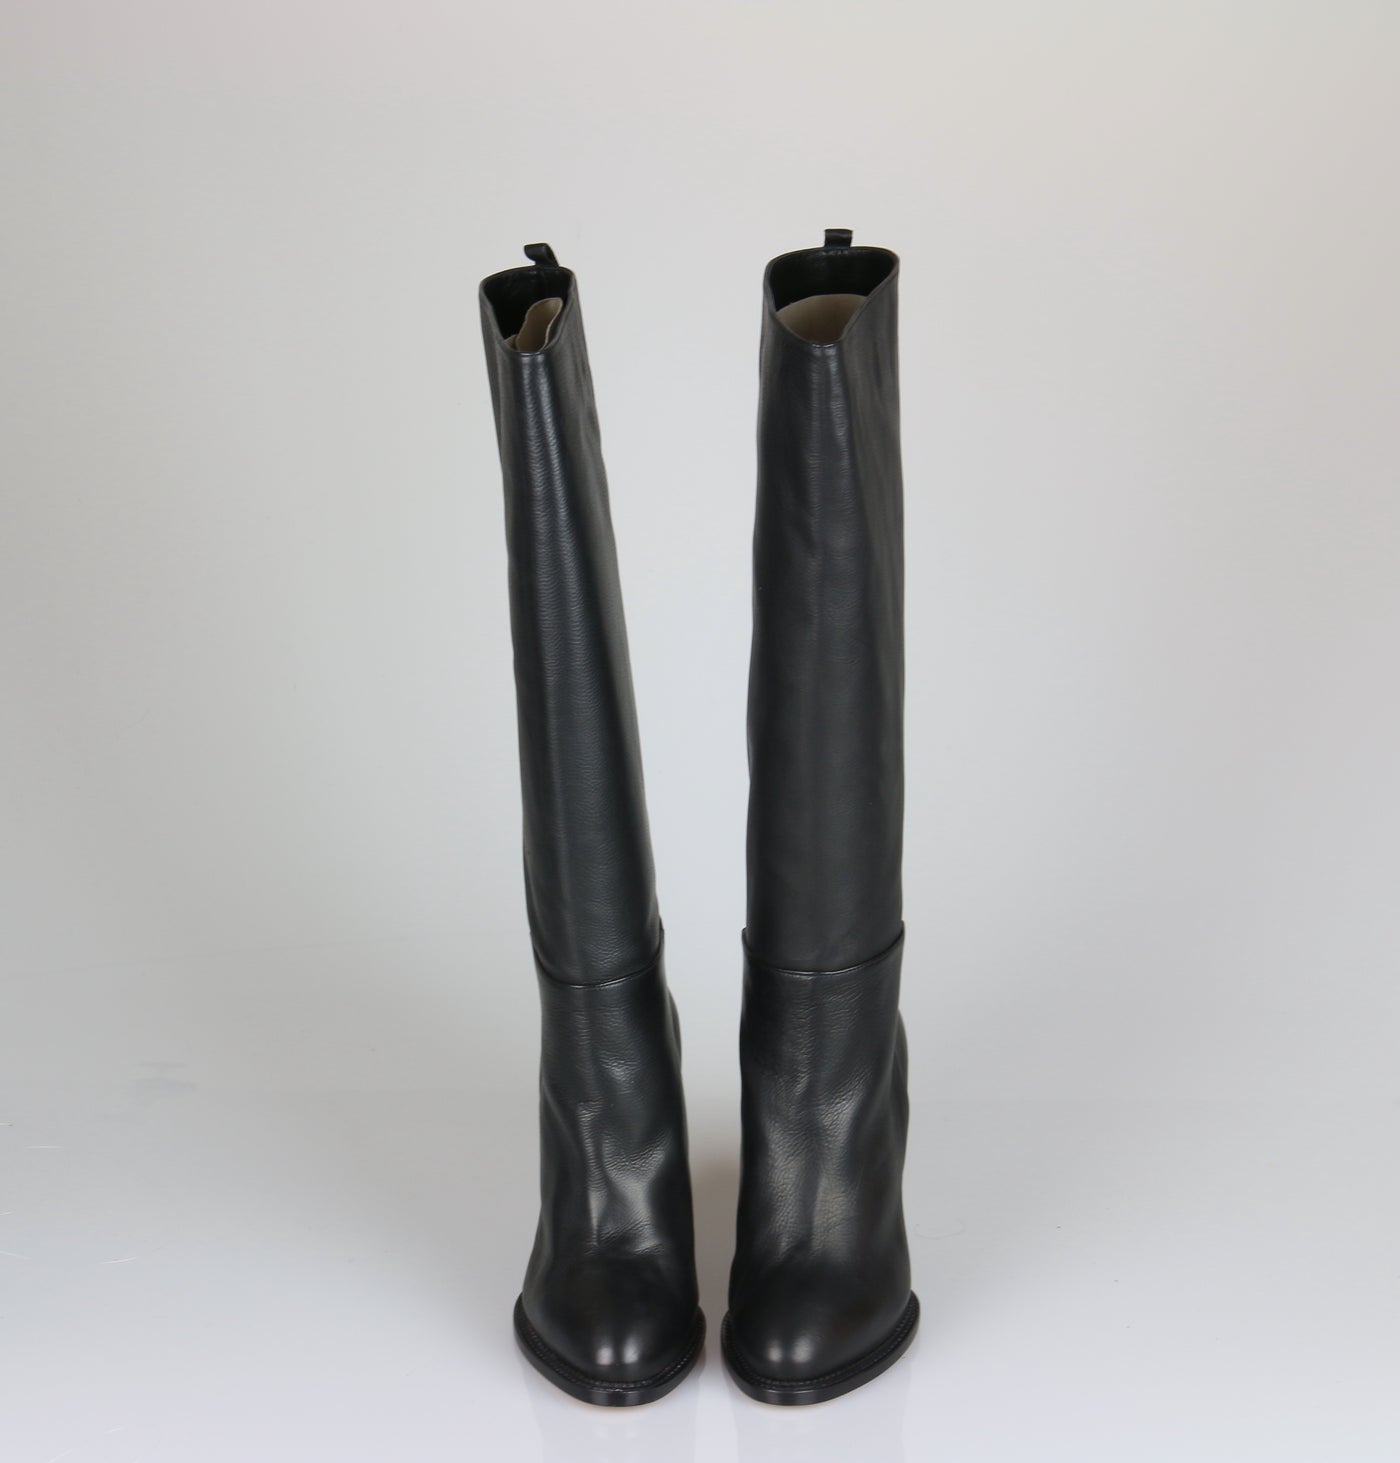 Black wedge leather boots